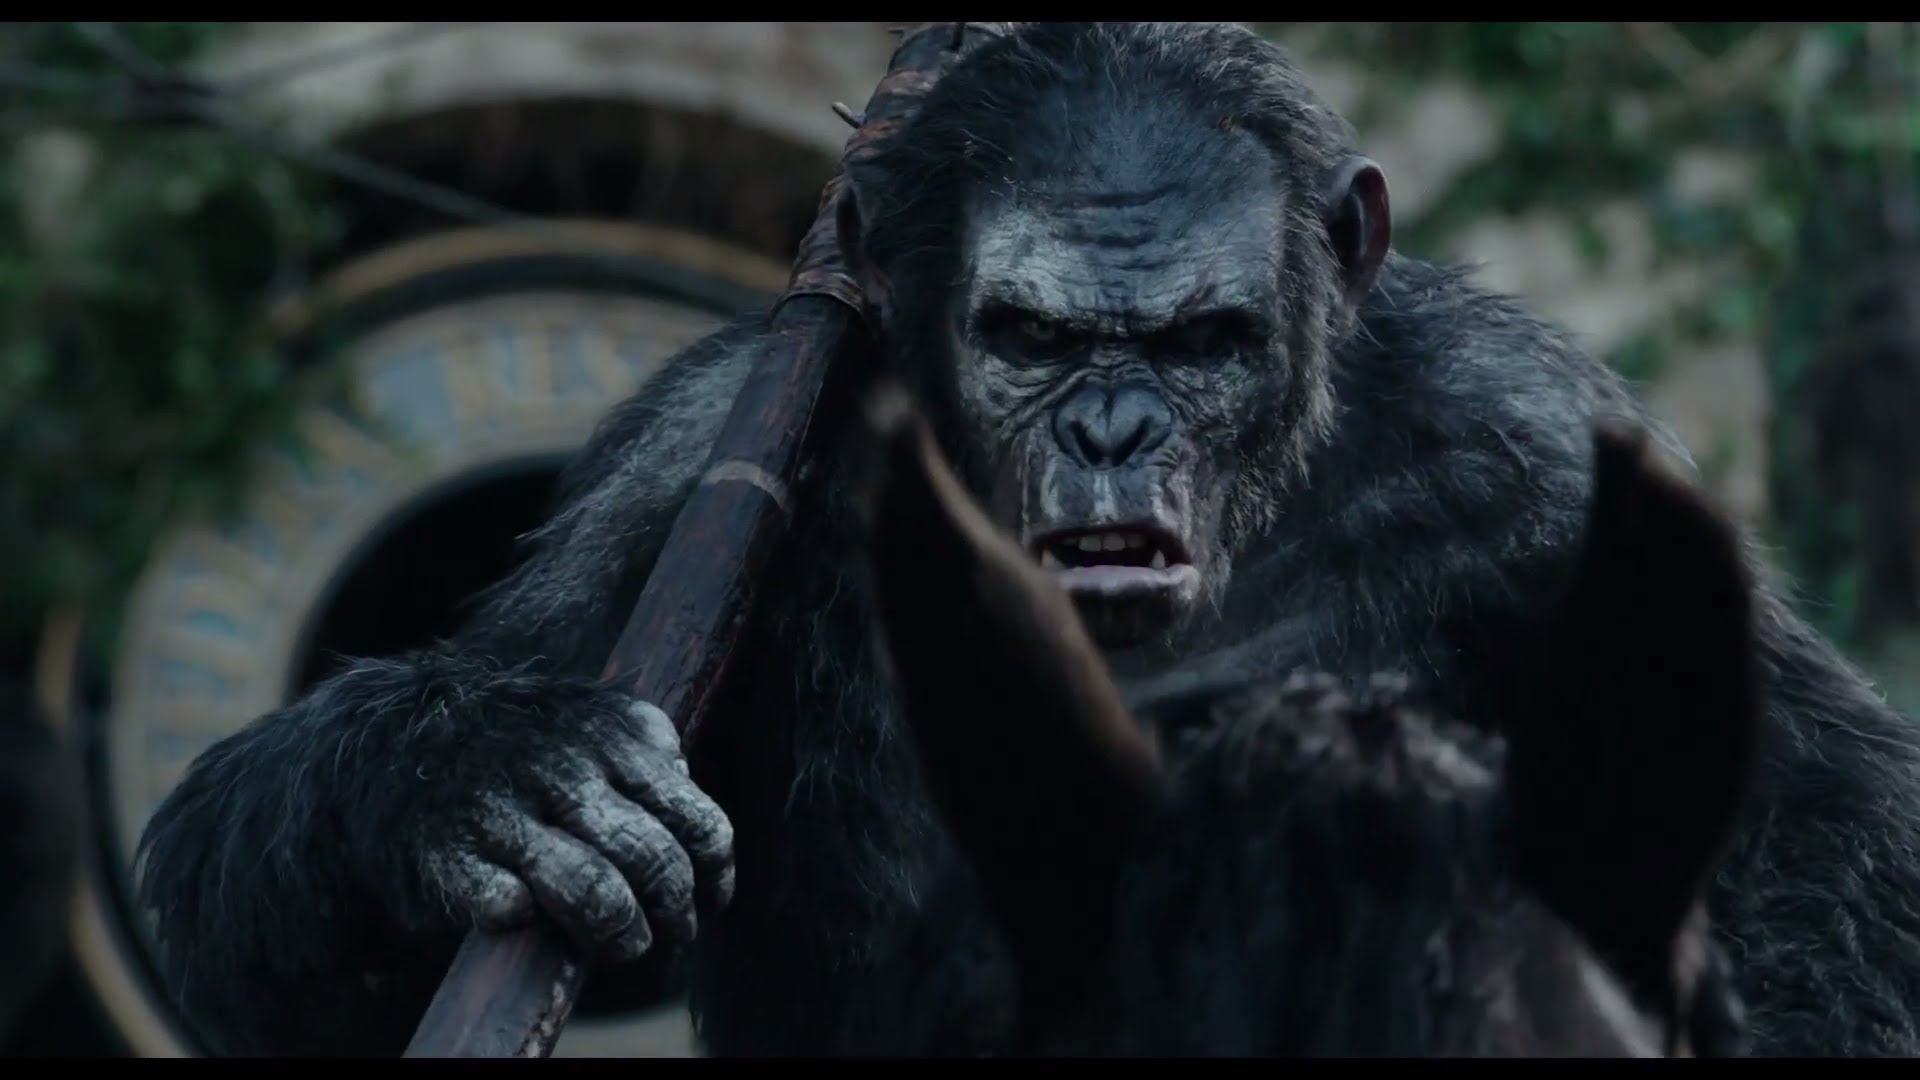 Dawn of the Planet of the Apes - Final Trailer (HD)